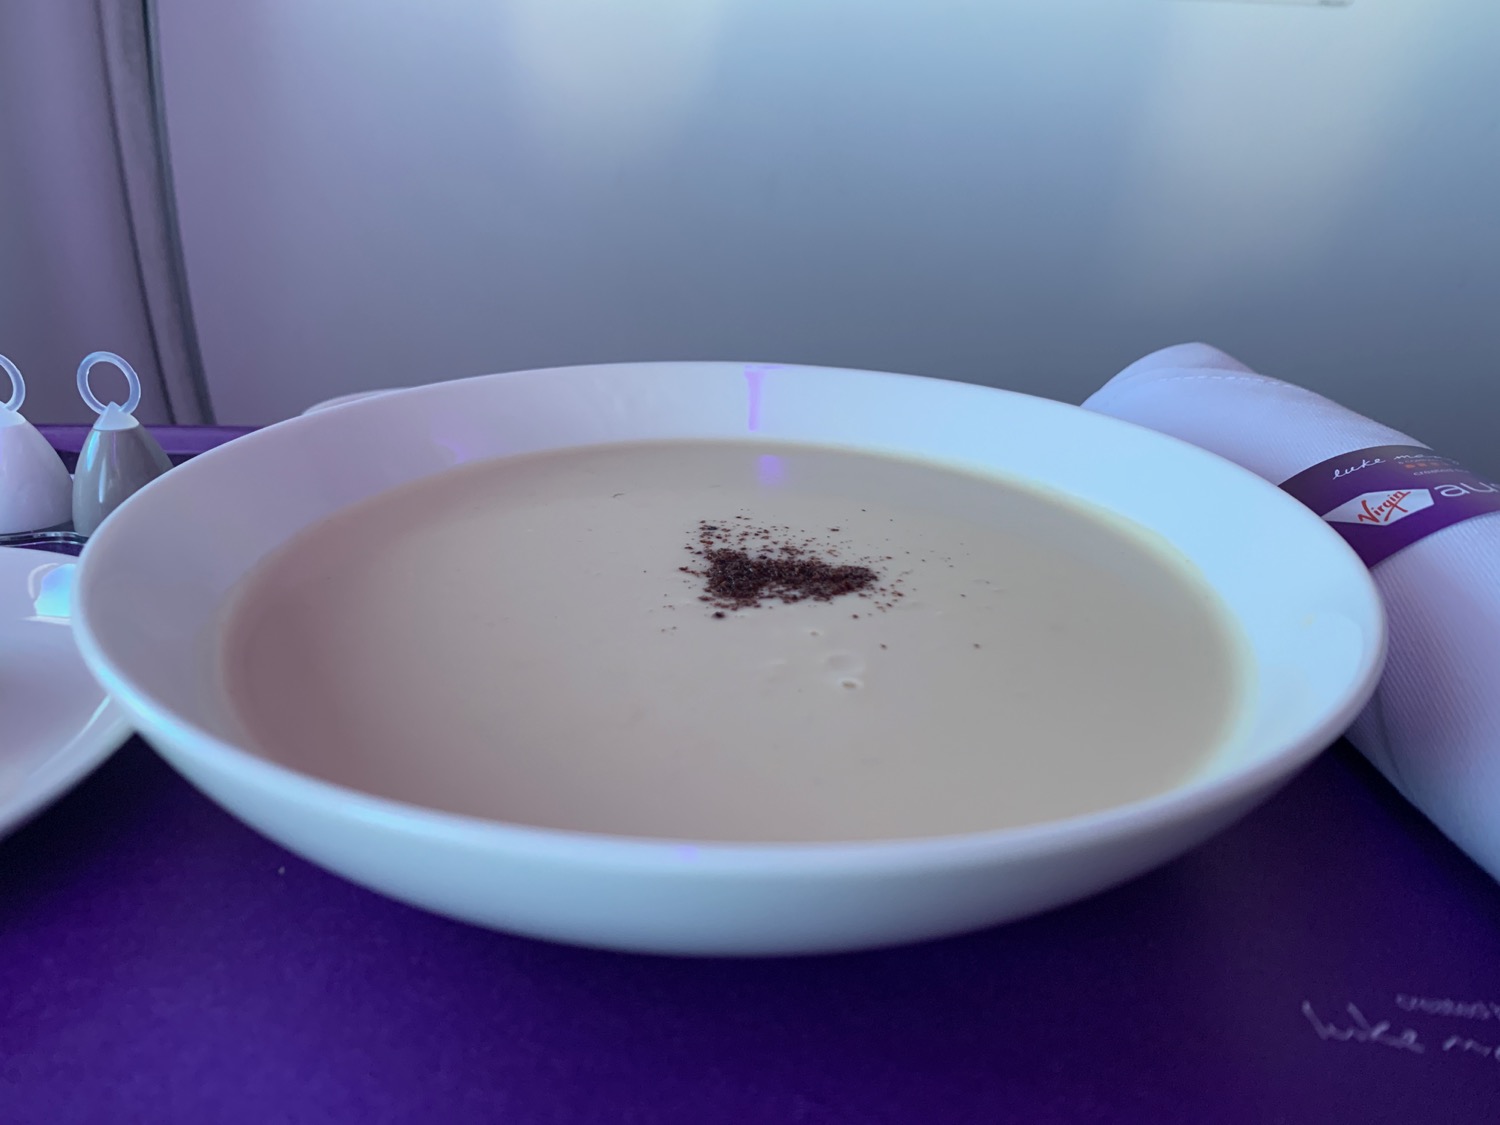 a bowl of soup on a purple surface